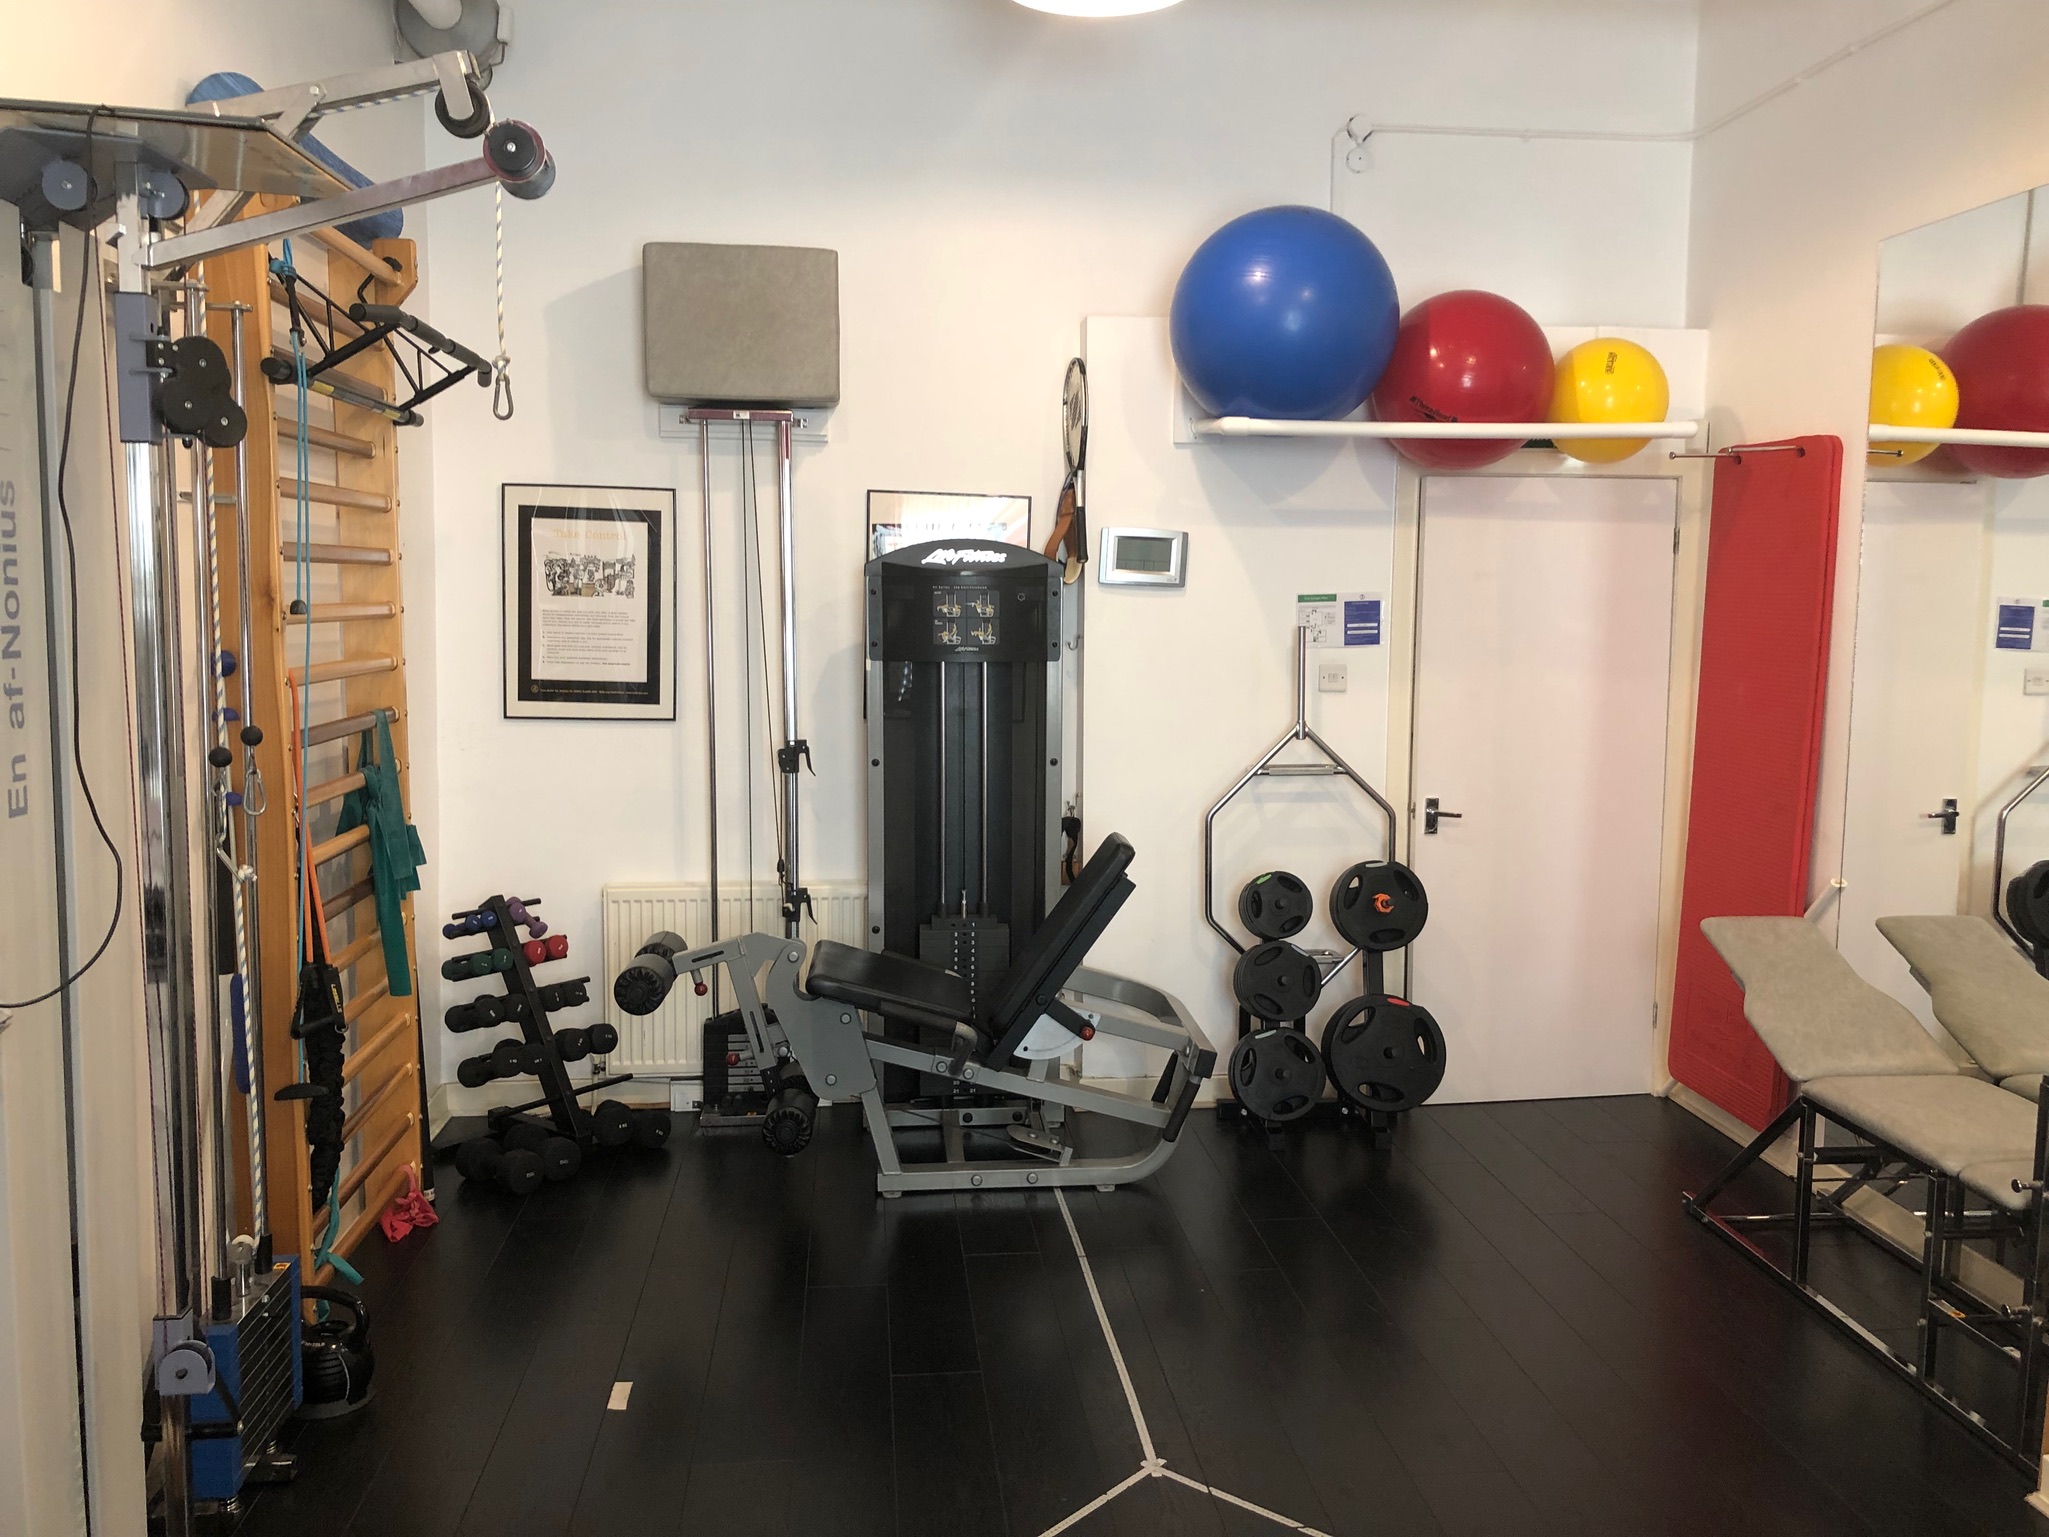 Gym equipment and balls at Physis Physiotherapy